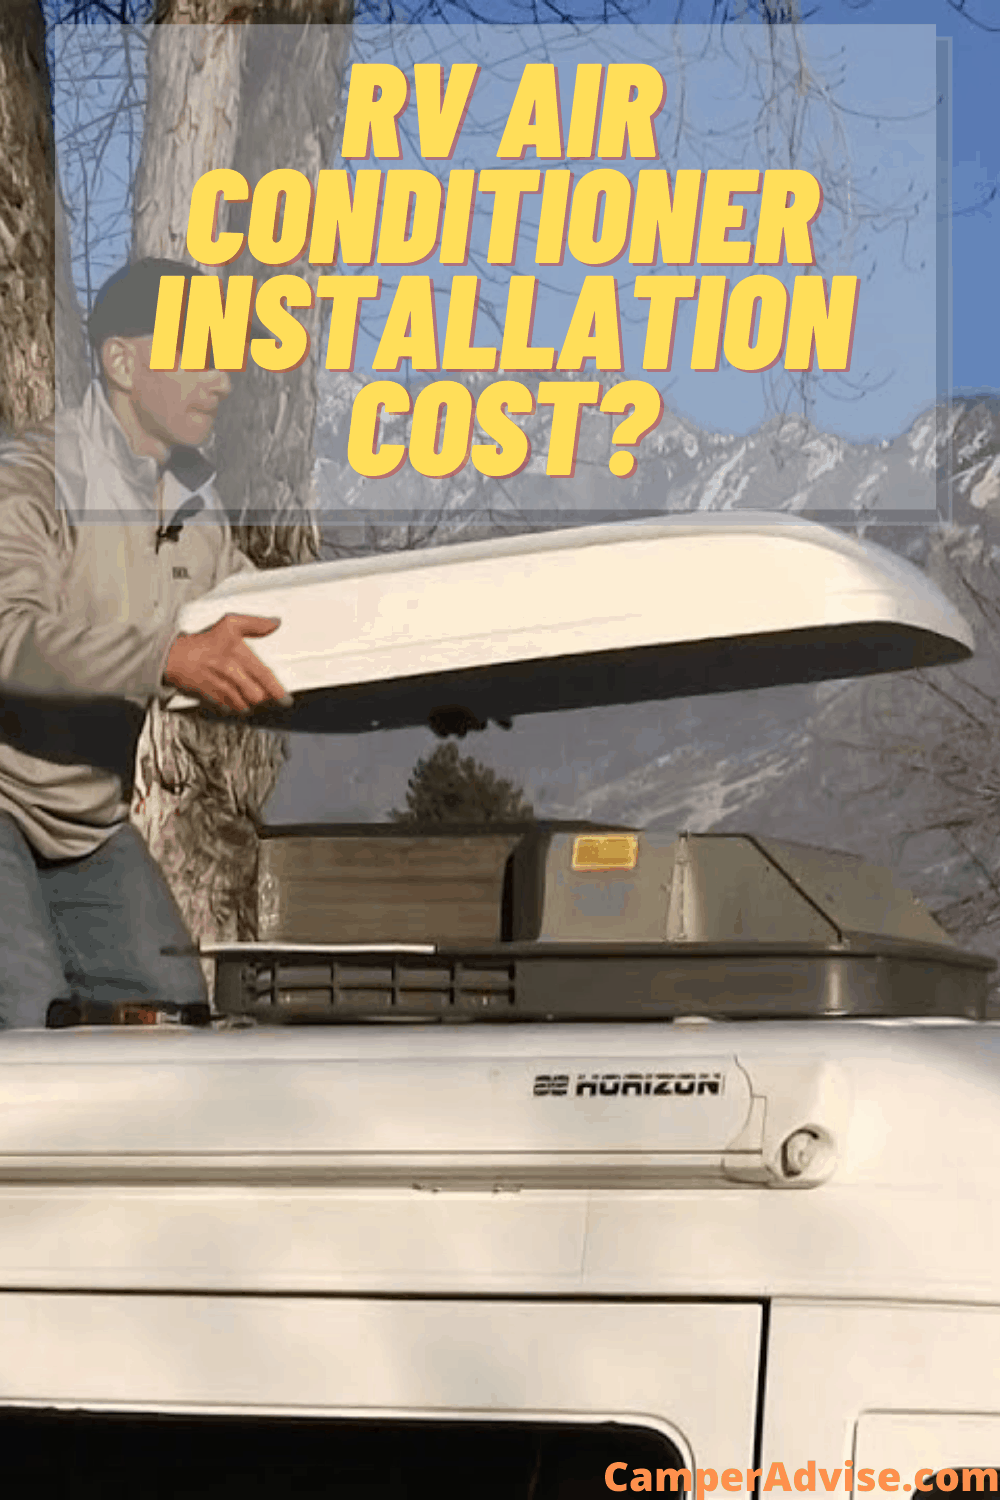 How Much Does RV Air Conditioner Installation Cost? (2021) Cost To Install Second Ac Unit In Rv